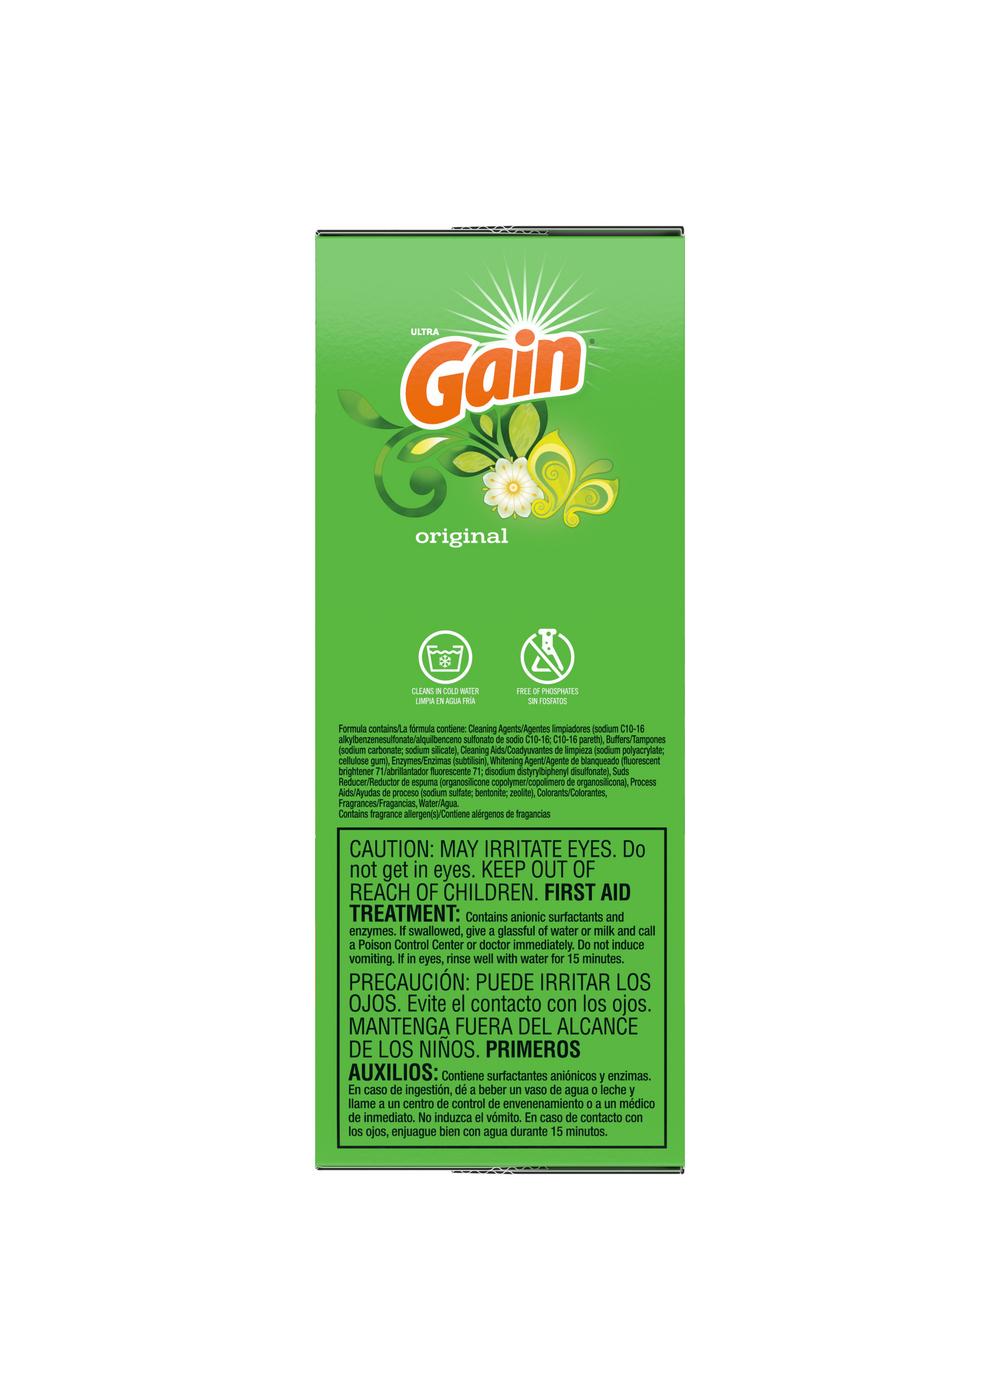 Gain Aroma Boost HE Powder Laundry Detergent, 89 Loads - Original; image 6 of 8